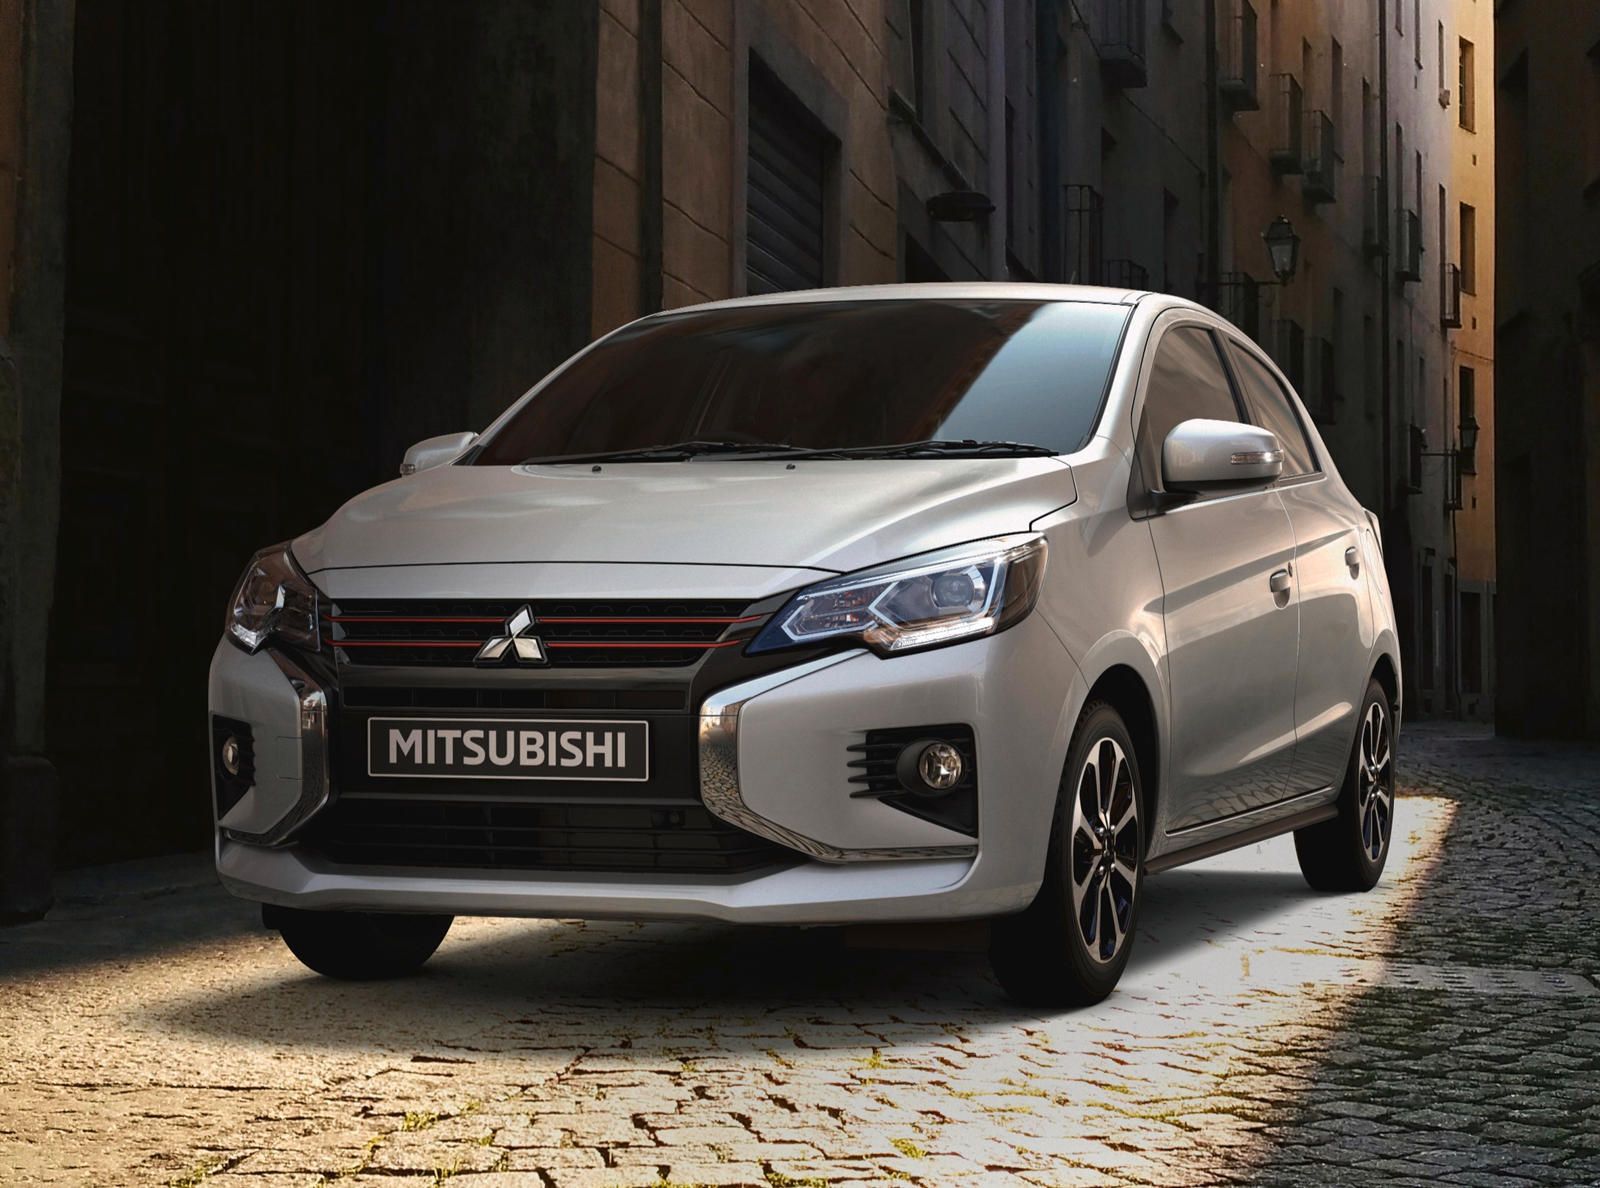 2020 Mitsubishi Mirage Arrives With Fresh Styling And Value | CarBuzz |  Moteur, Extérieur